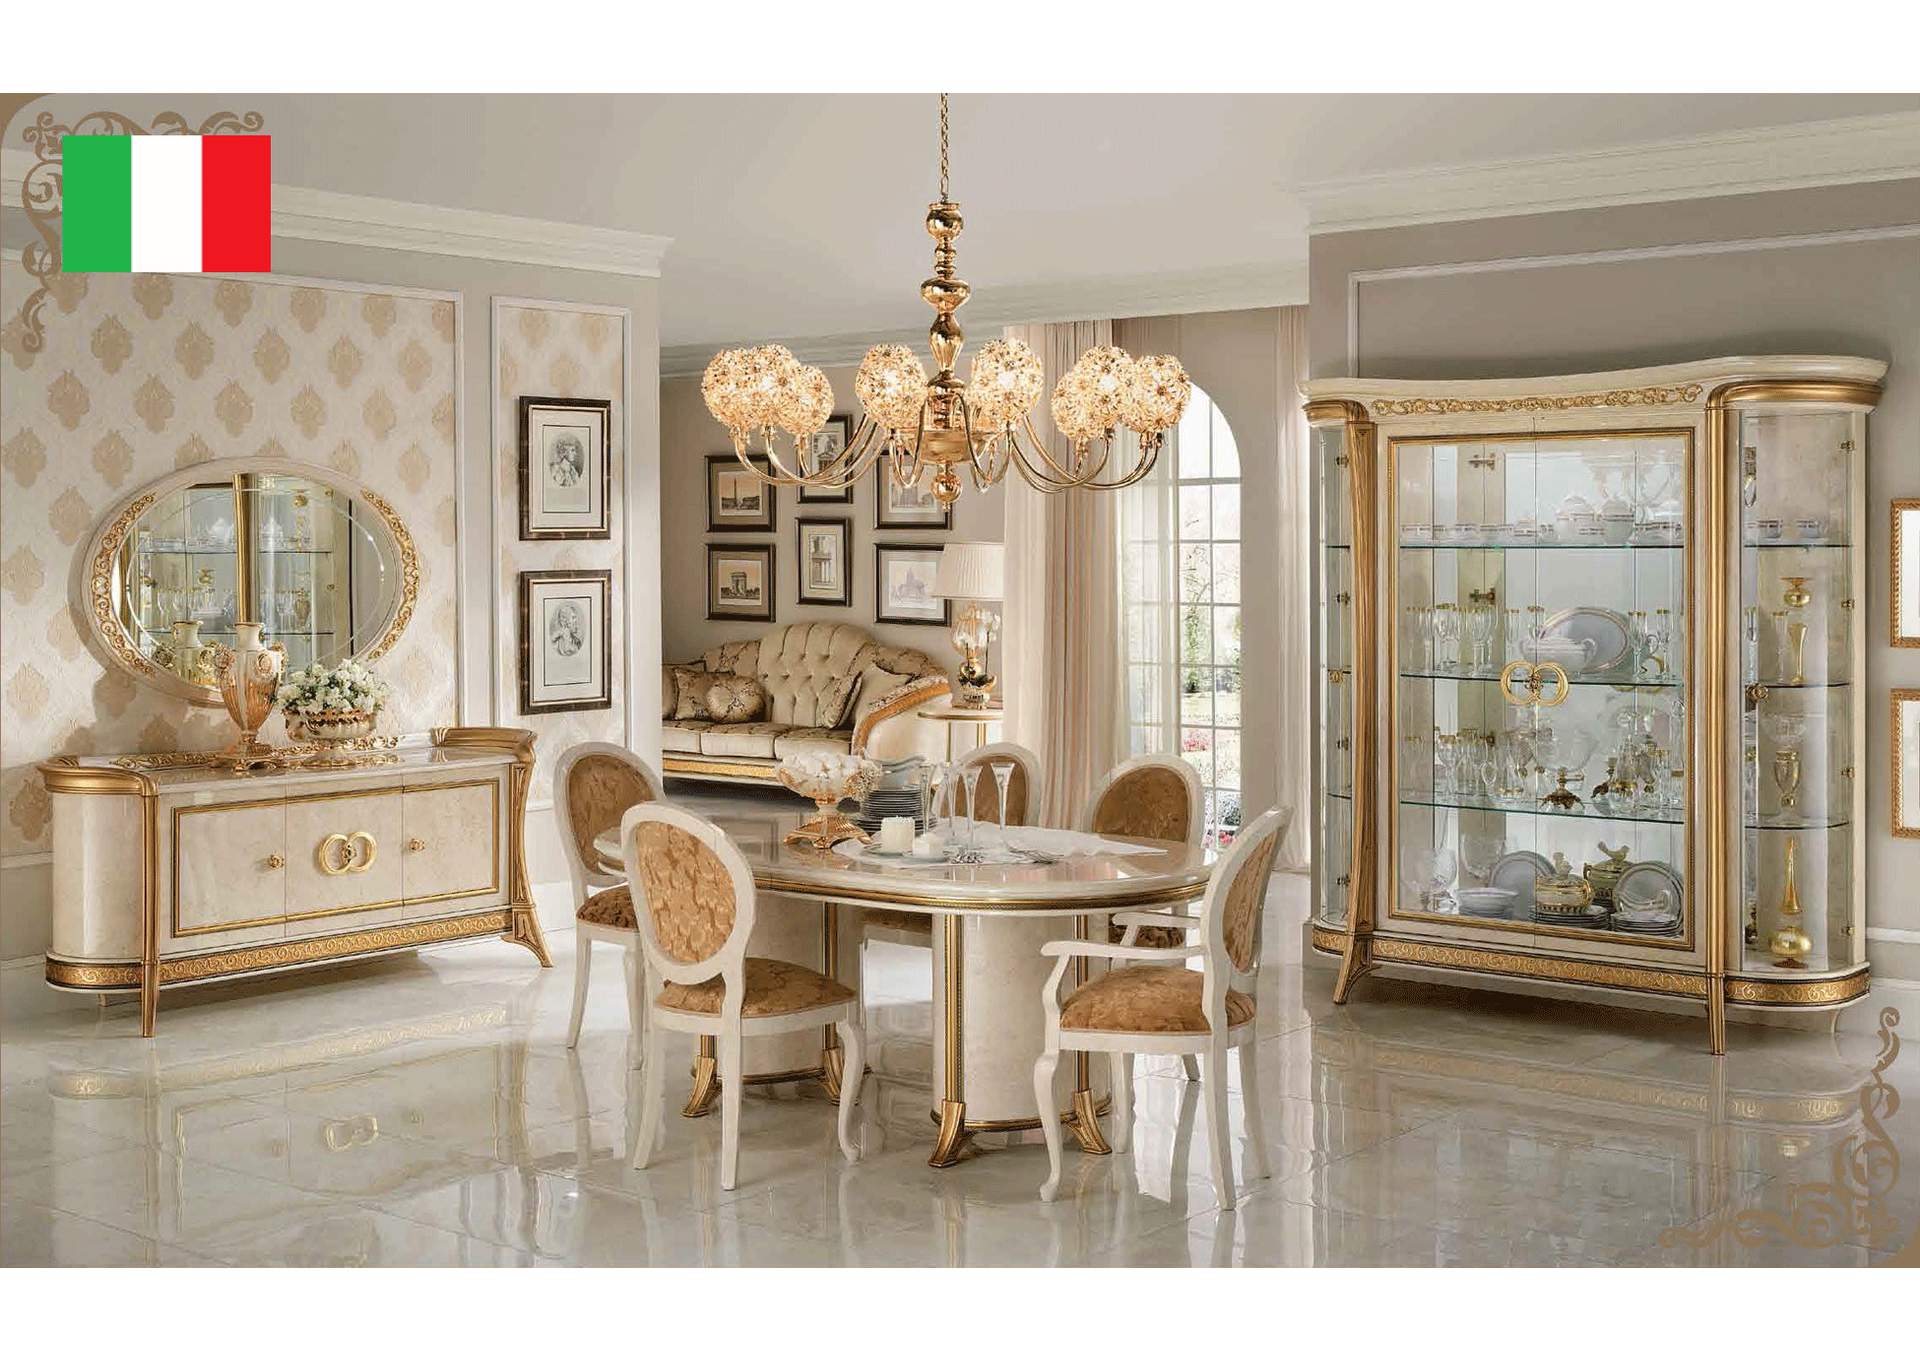 Melodia Day Dining Room SET,ESF Wholesale Furniture